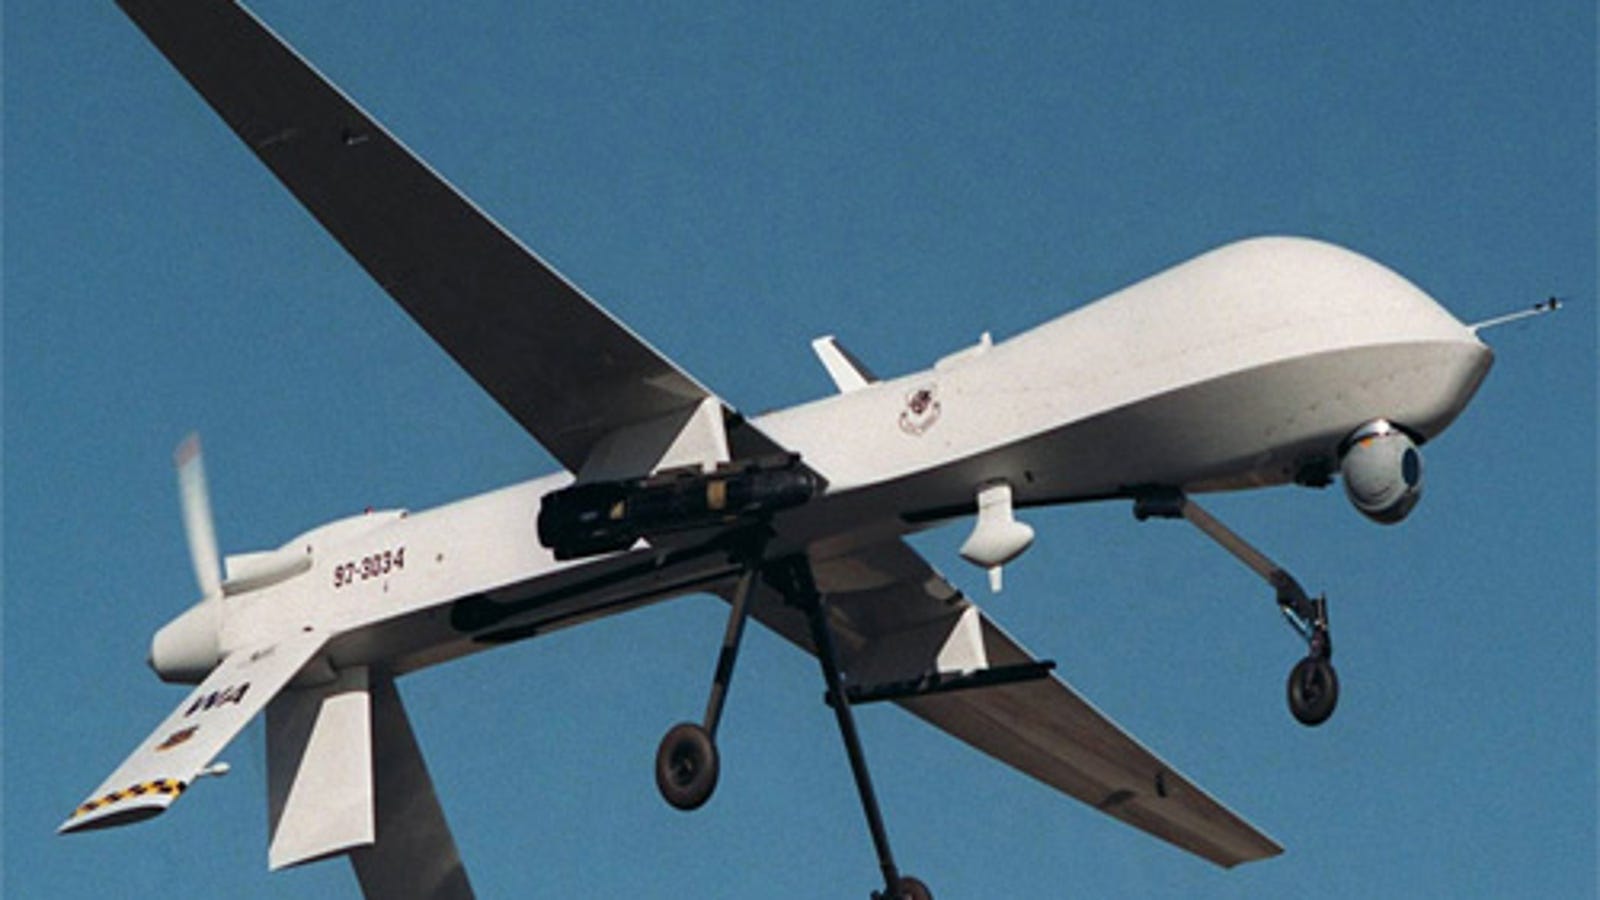 CIA Drone Killings Could Lead To A "PlayStation Mentality" Towards Killing